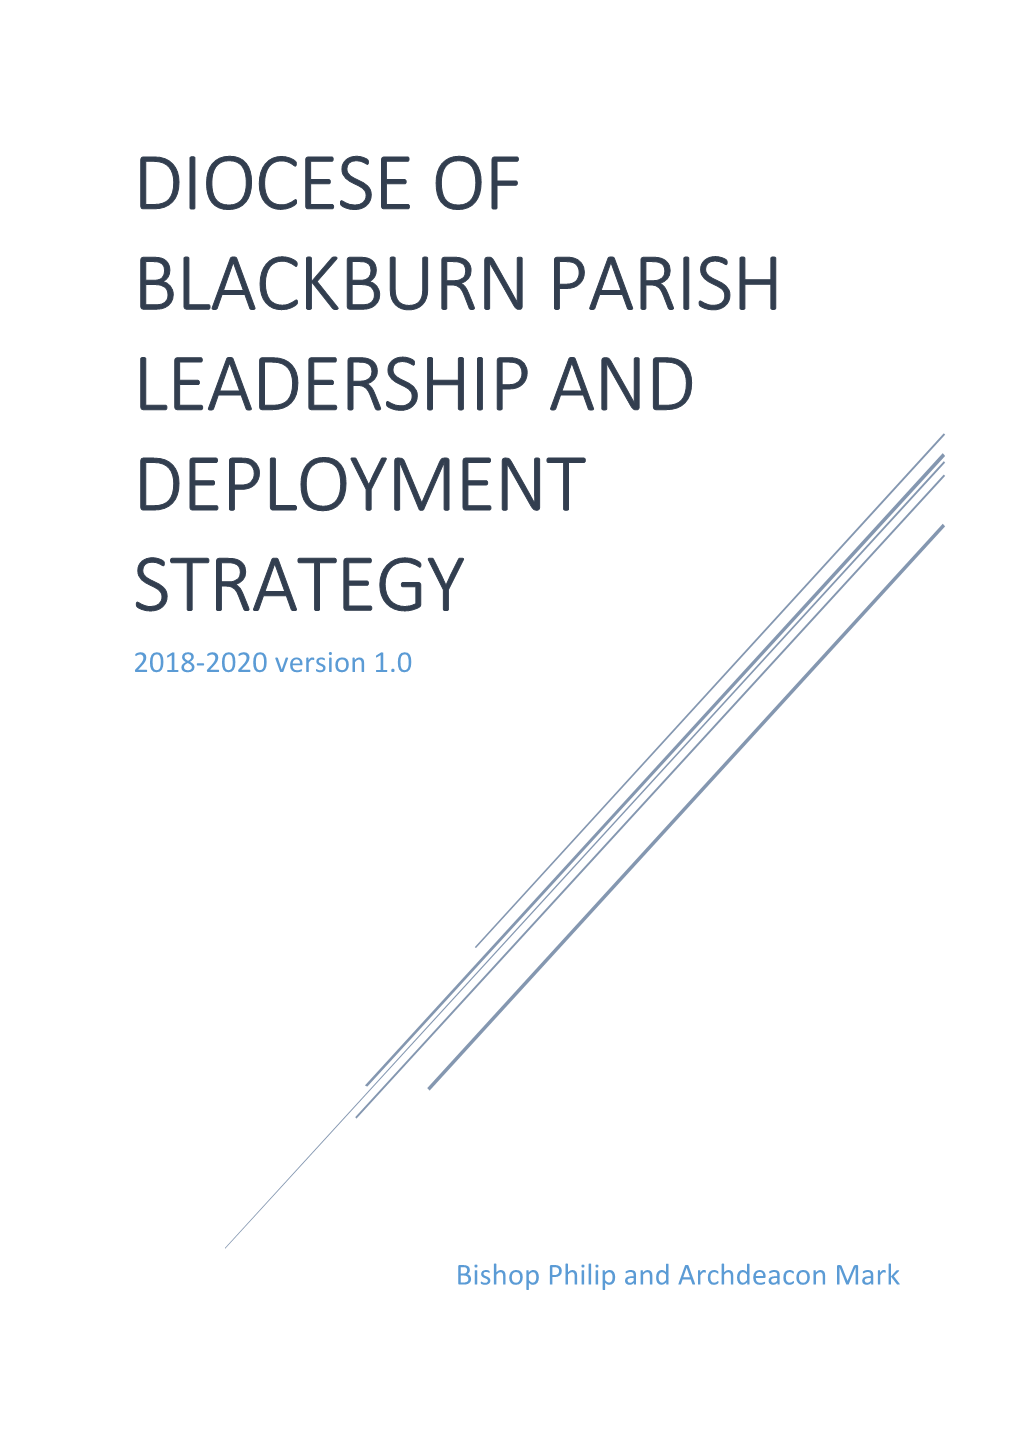 DIOCESE of BLACKBURN PARISH LEADERSHIP and DEPLOYMENT STRATEGY 2018-2020 Version 1.0